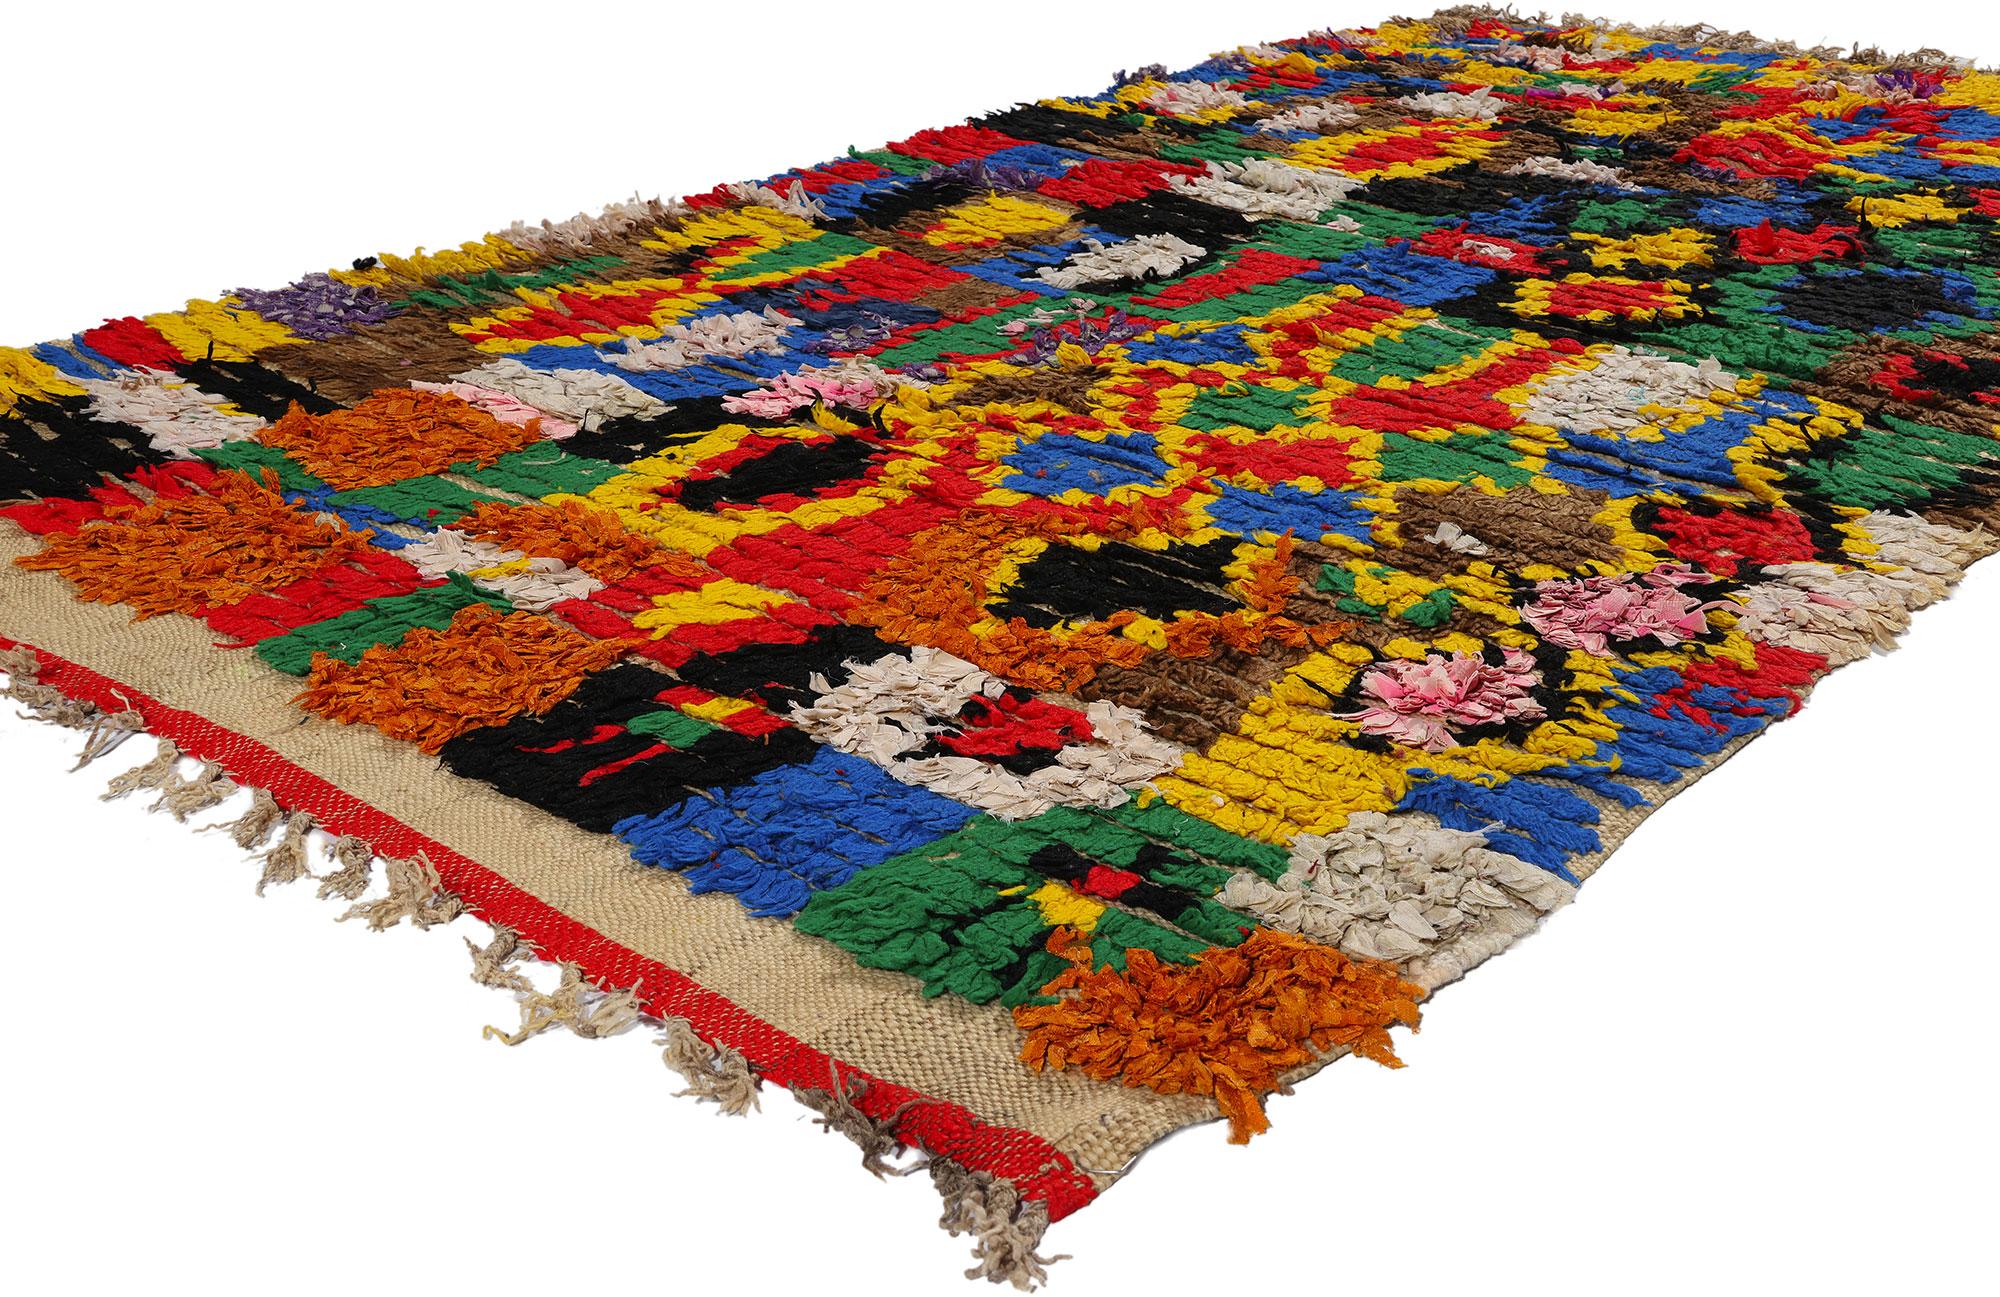 21738 Vintage Boucherouite Moroccan Azilal Rag Rug, 04'04 x 07'03. Azilal rag rugs, affectionately celebrated as Azilal Boucherouite masterpieces, unleash a riotous narrative of sustainable artistry resonating from the heart of the Azilal region in